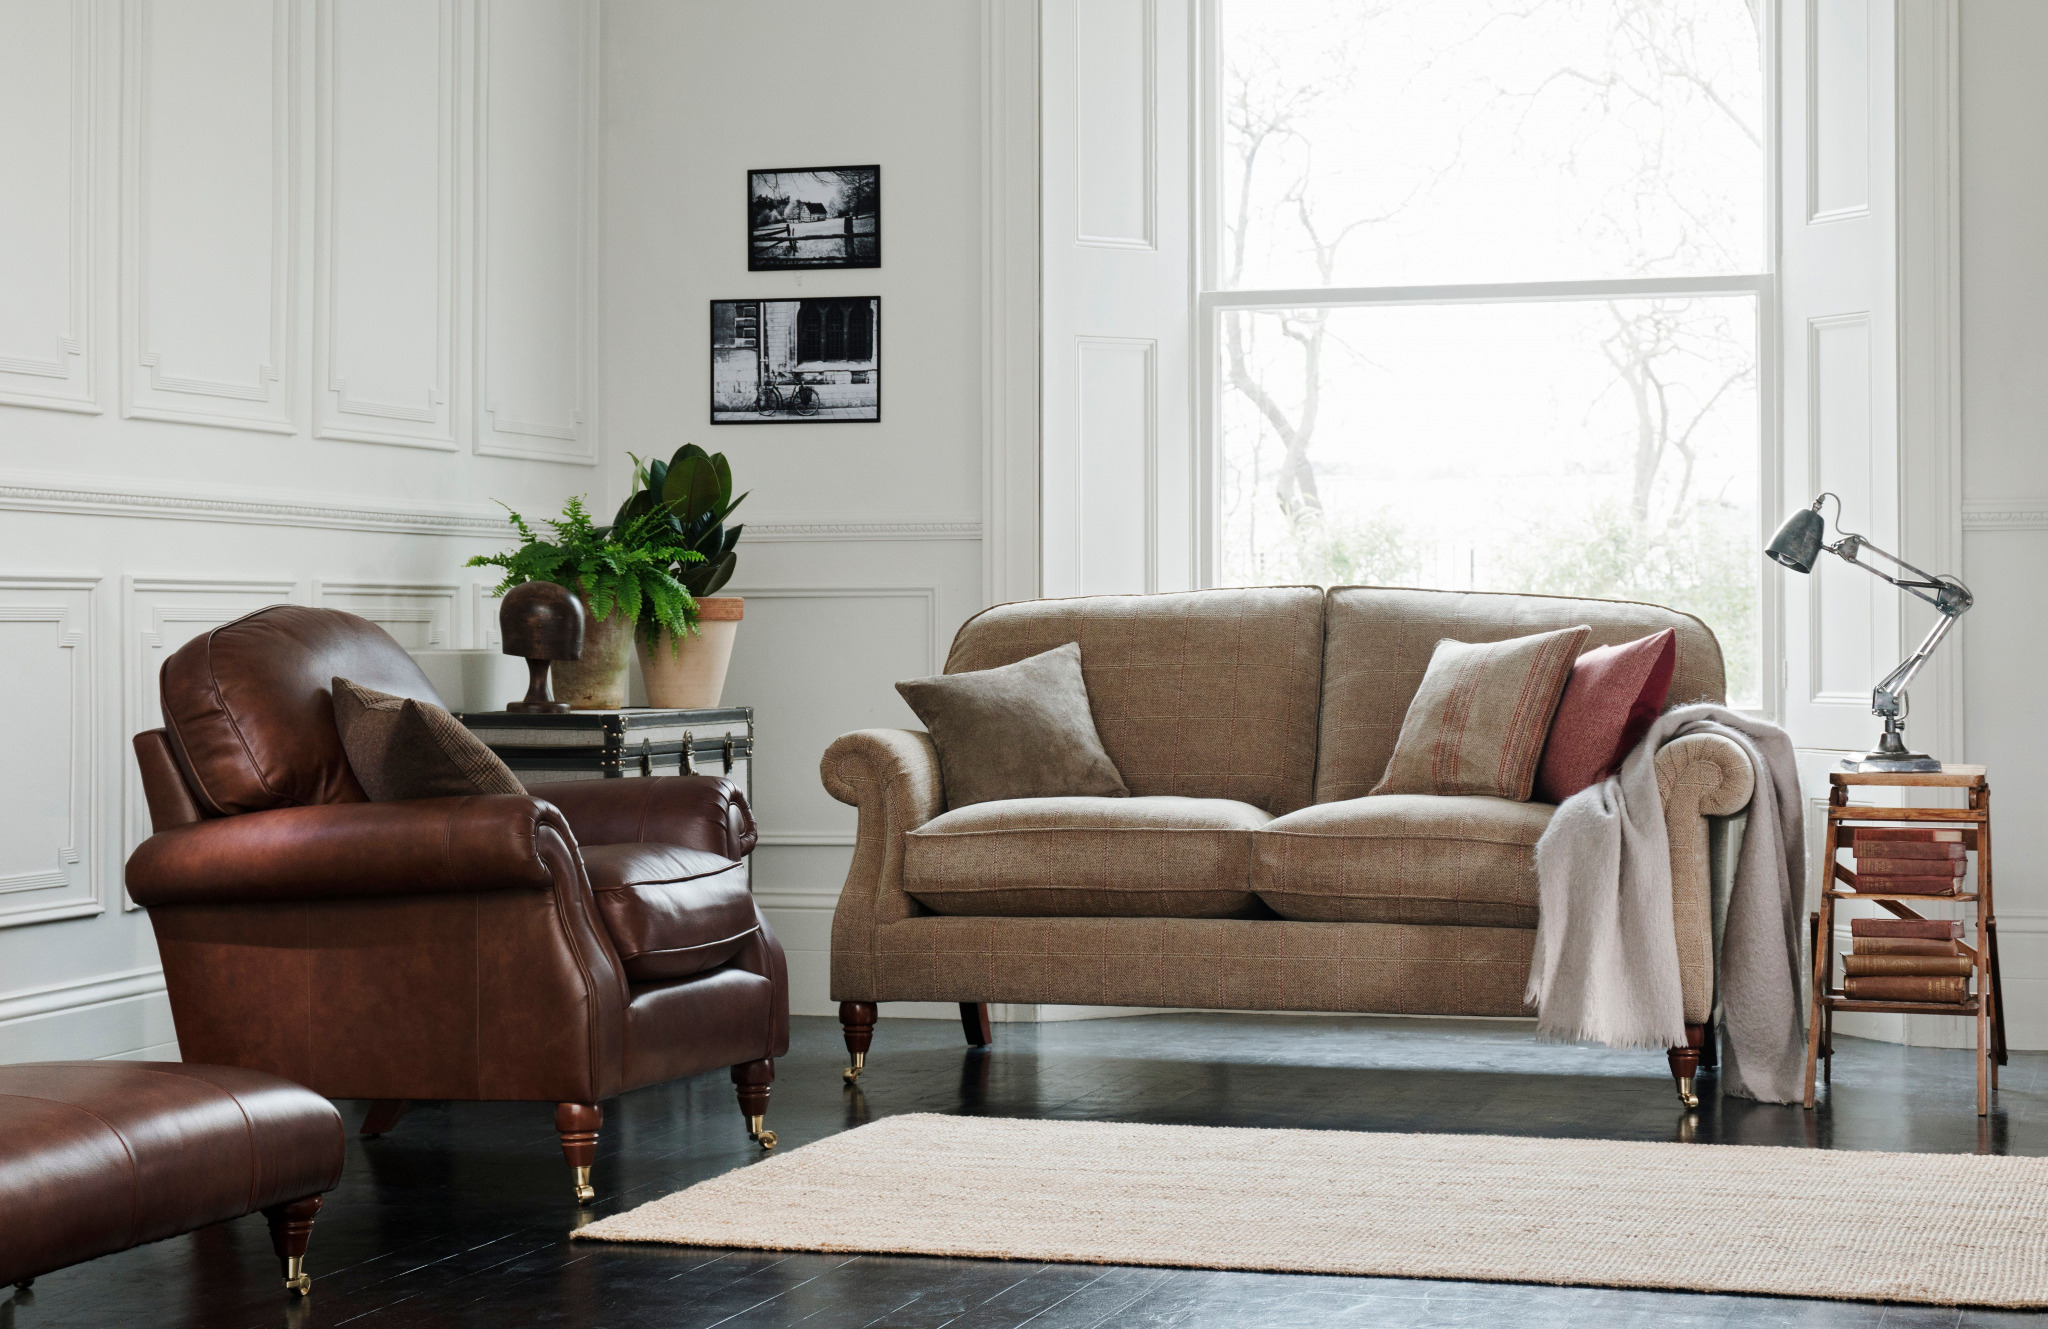 Finding the Perfect Sofa for Your Dream Home